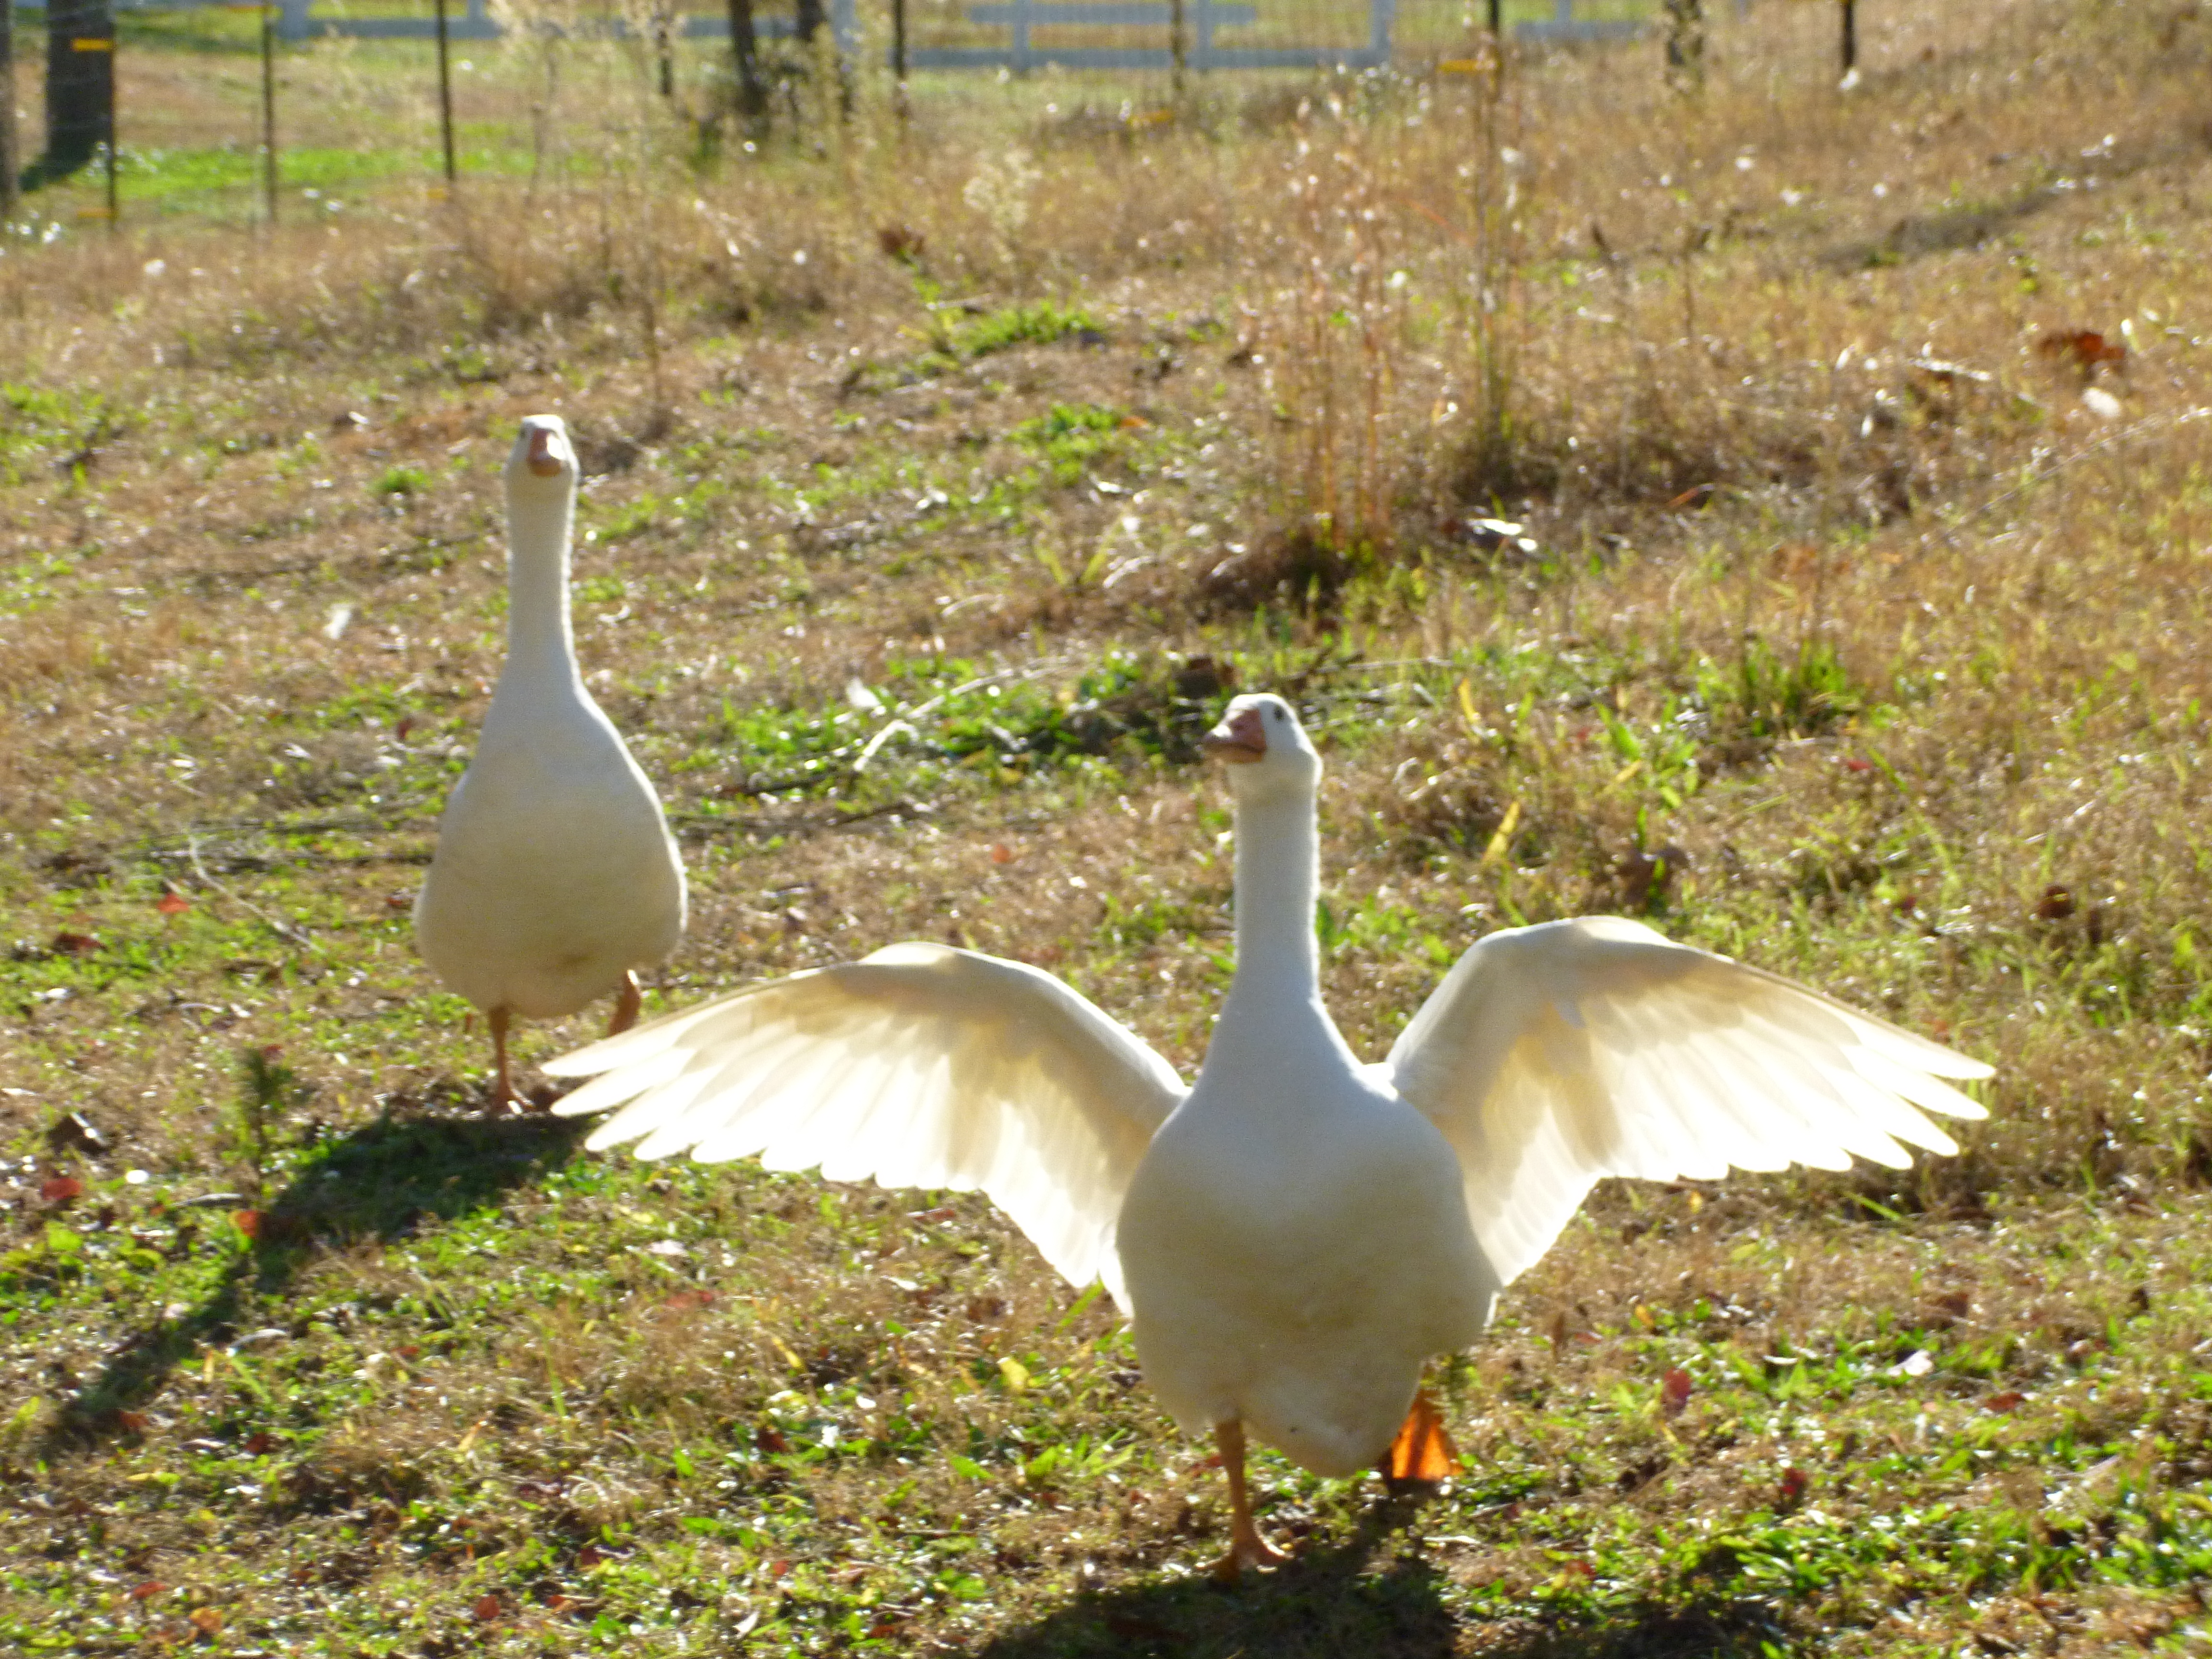 Romeo and Juliette... our Embden geese pair